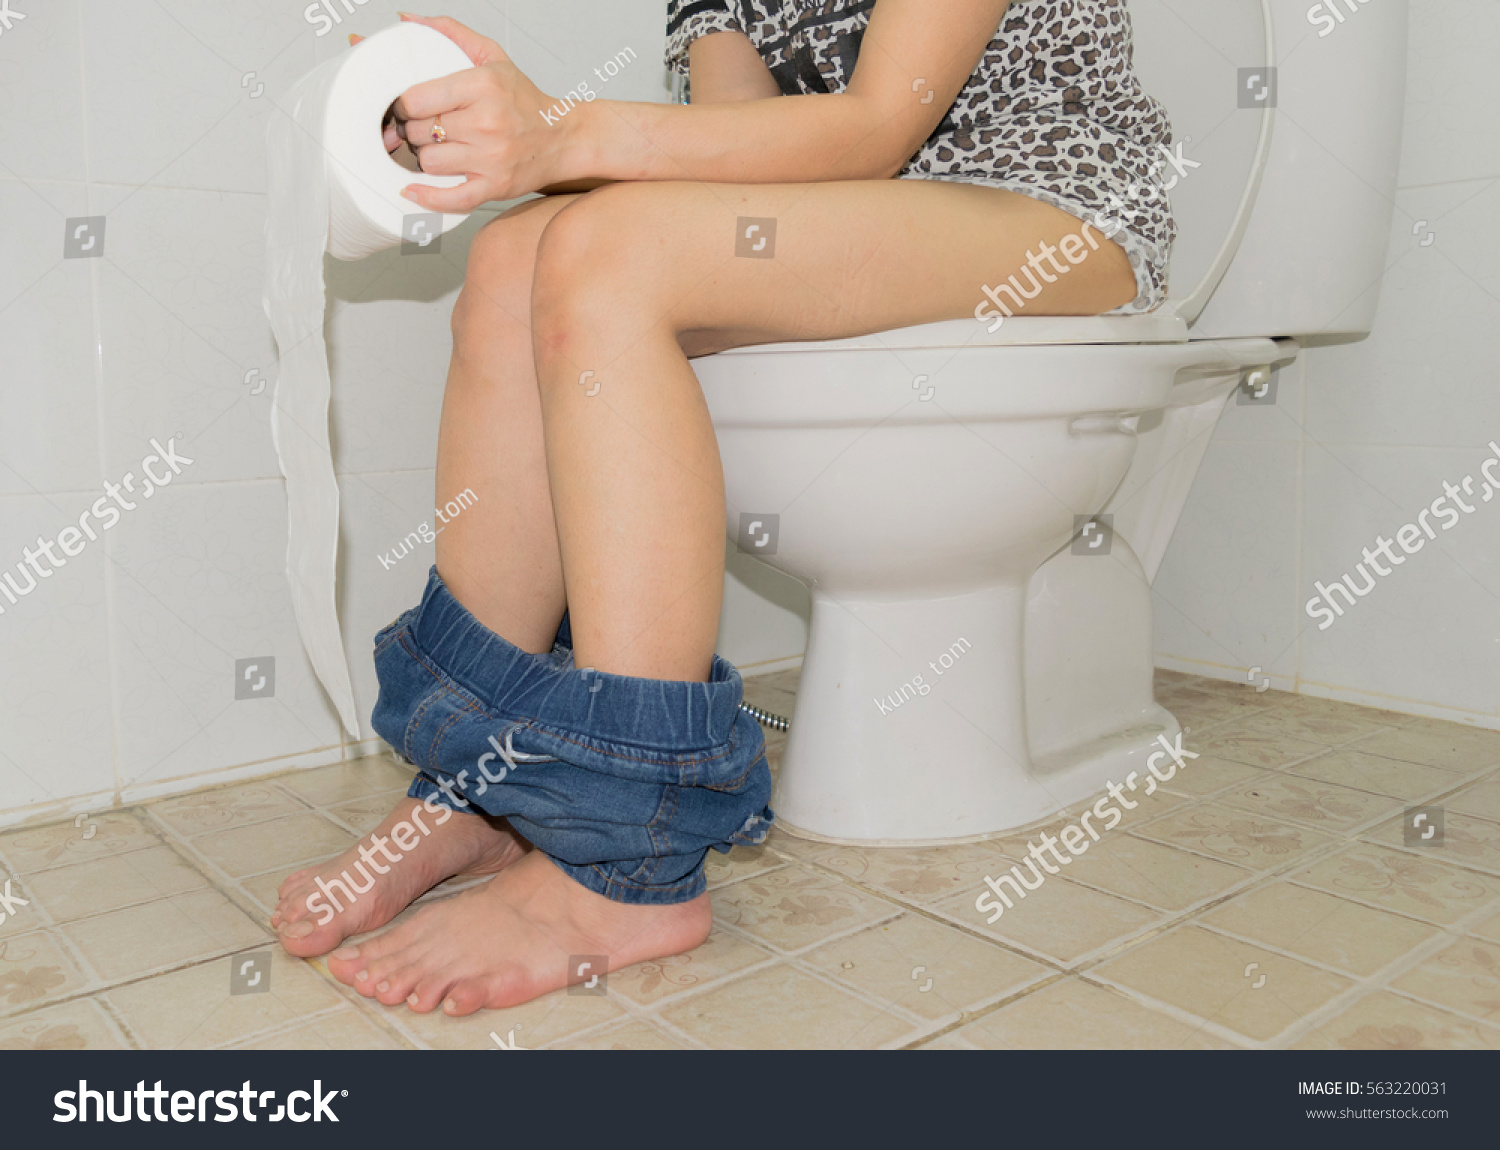 Girls On The Toilet Constipated